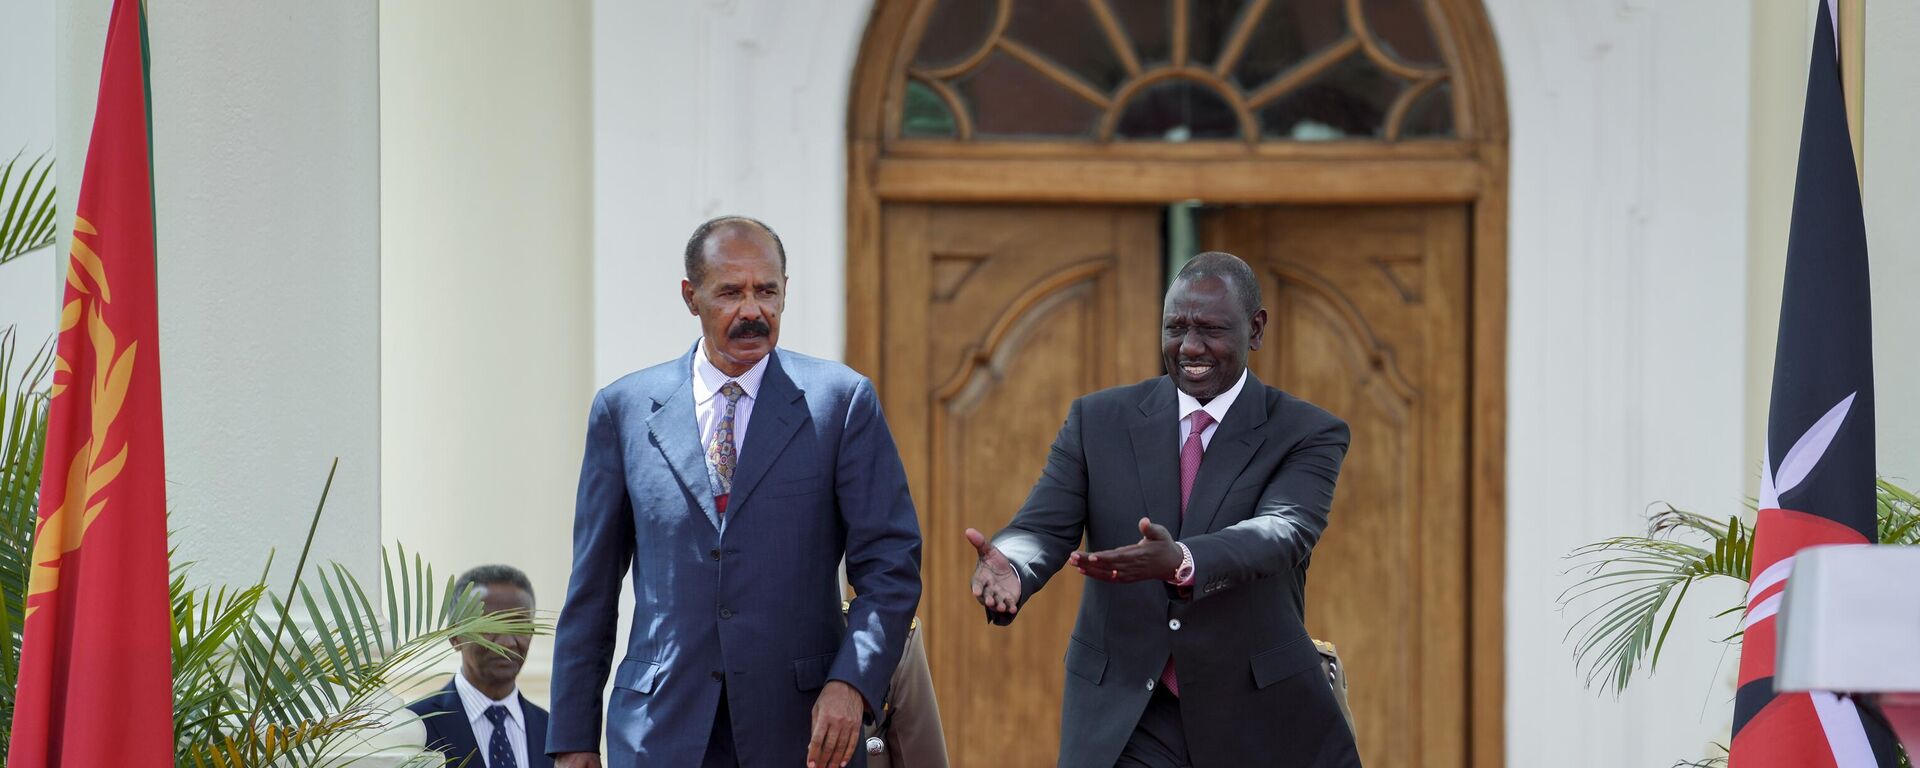 Eritrea's President Isaias Afwerki, left, is welcomed by Kenya's President William Ruto, right, as they arrive to speak to the media at State House in Nairobi, Kenya Thursday, Feb. 9, 2023.  - Sputnik International, 1920, 13.02.2023